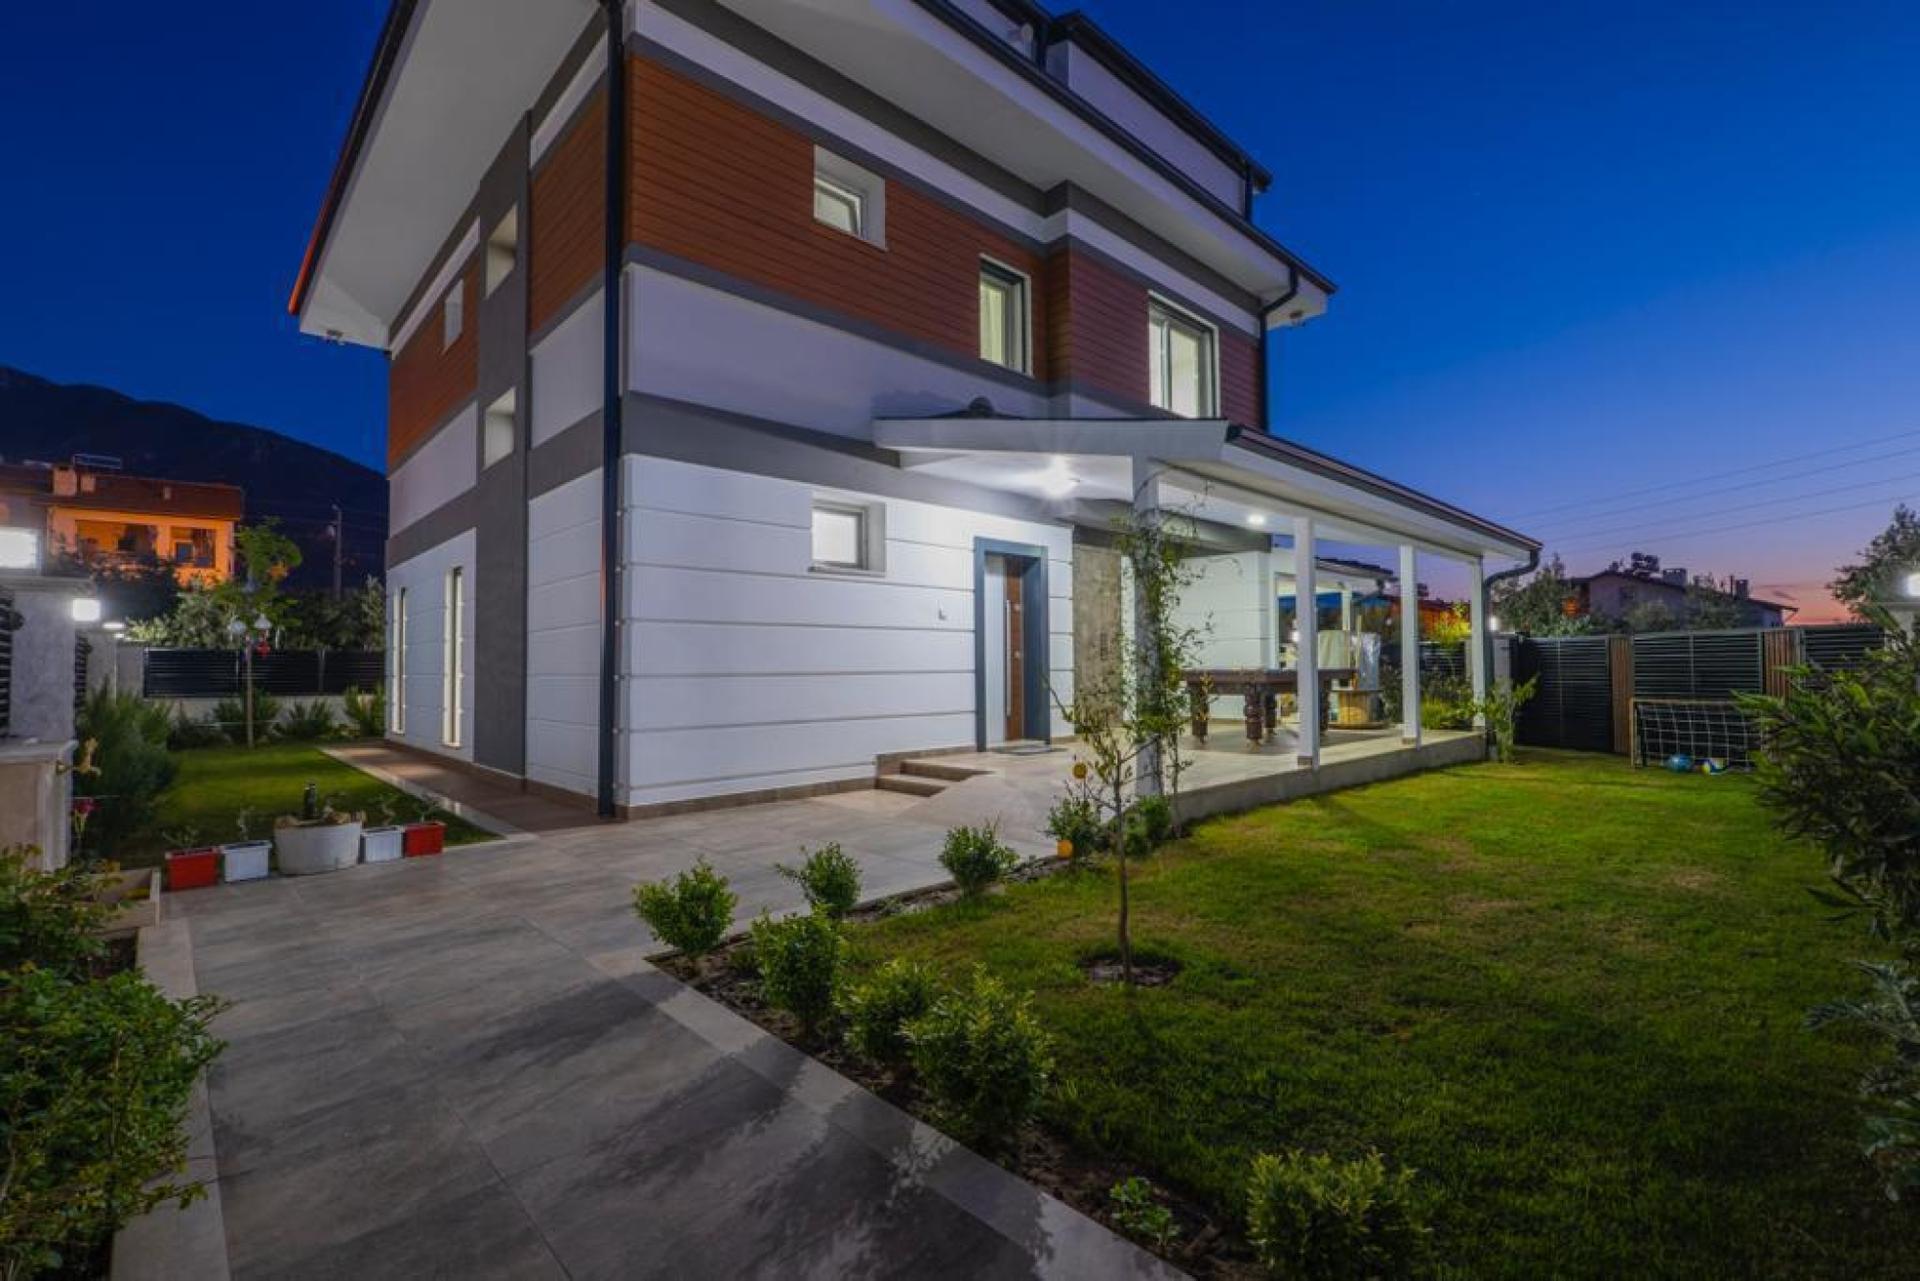 Our charming villa is in Fethiye, one of Turkey's most popular vacation towns. 